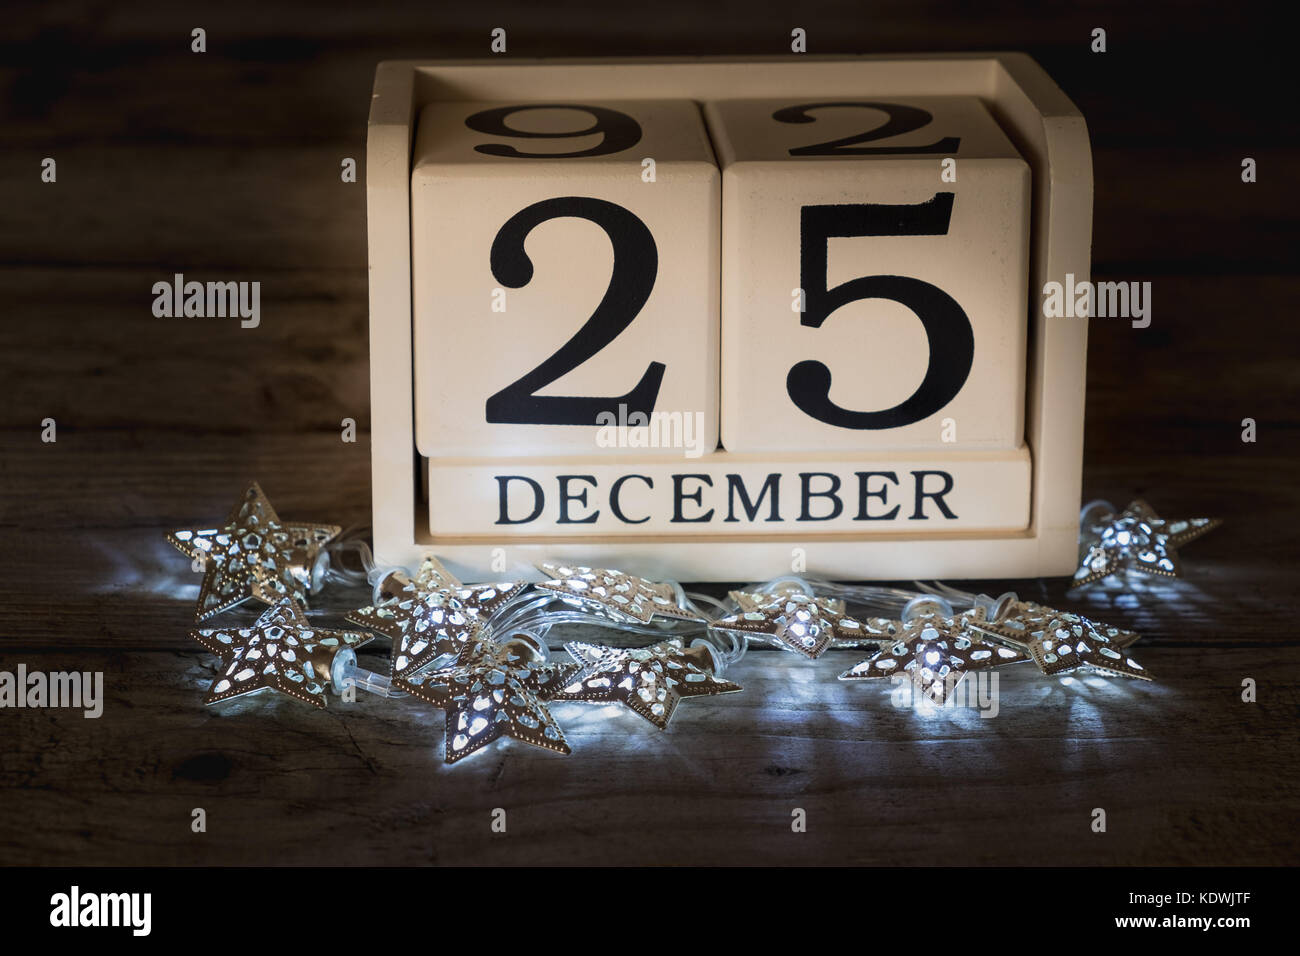 Christmas day date shown on calendar Stock Photo